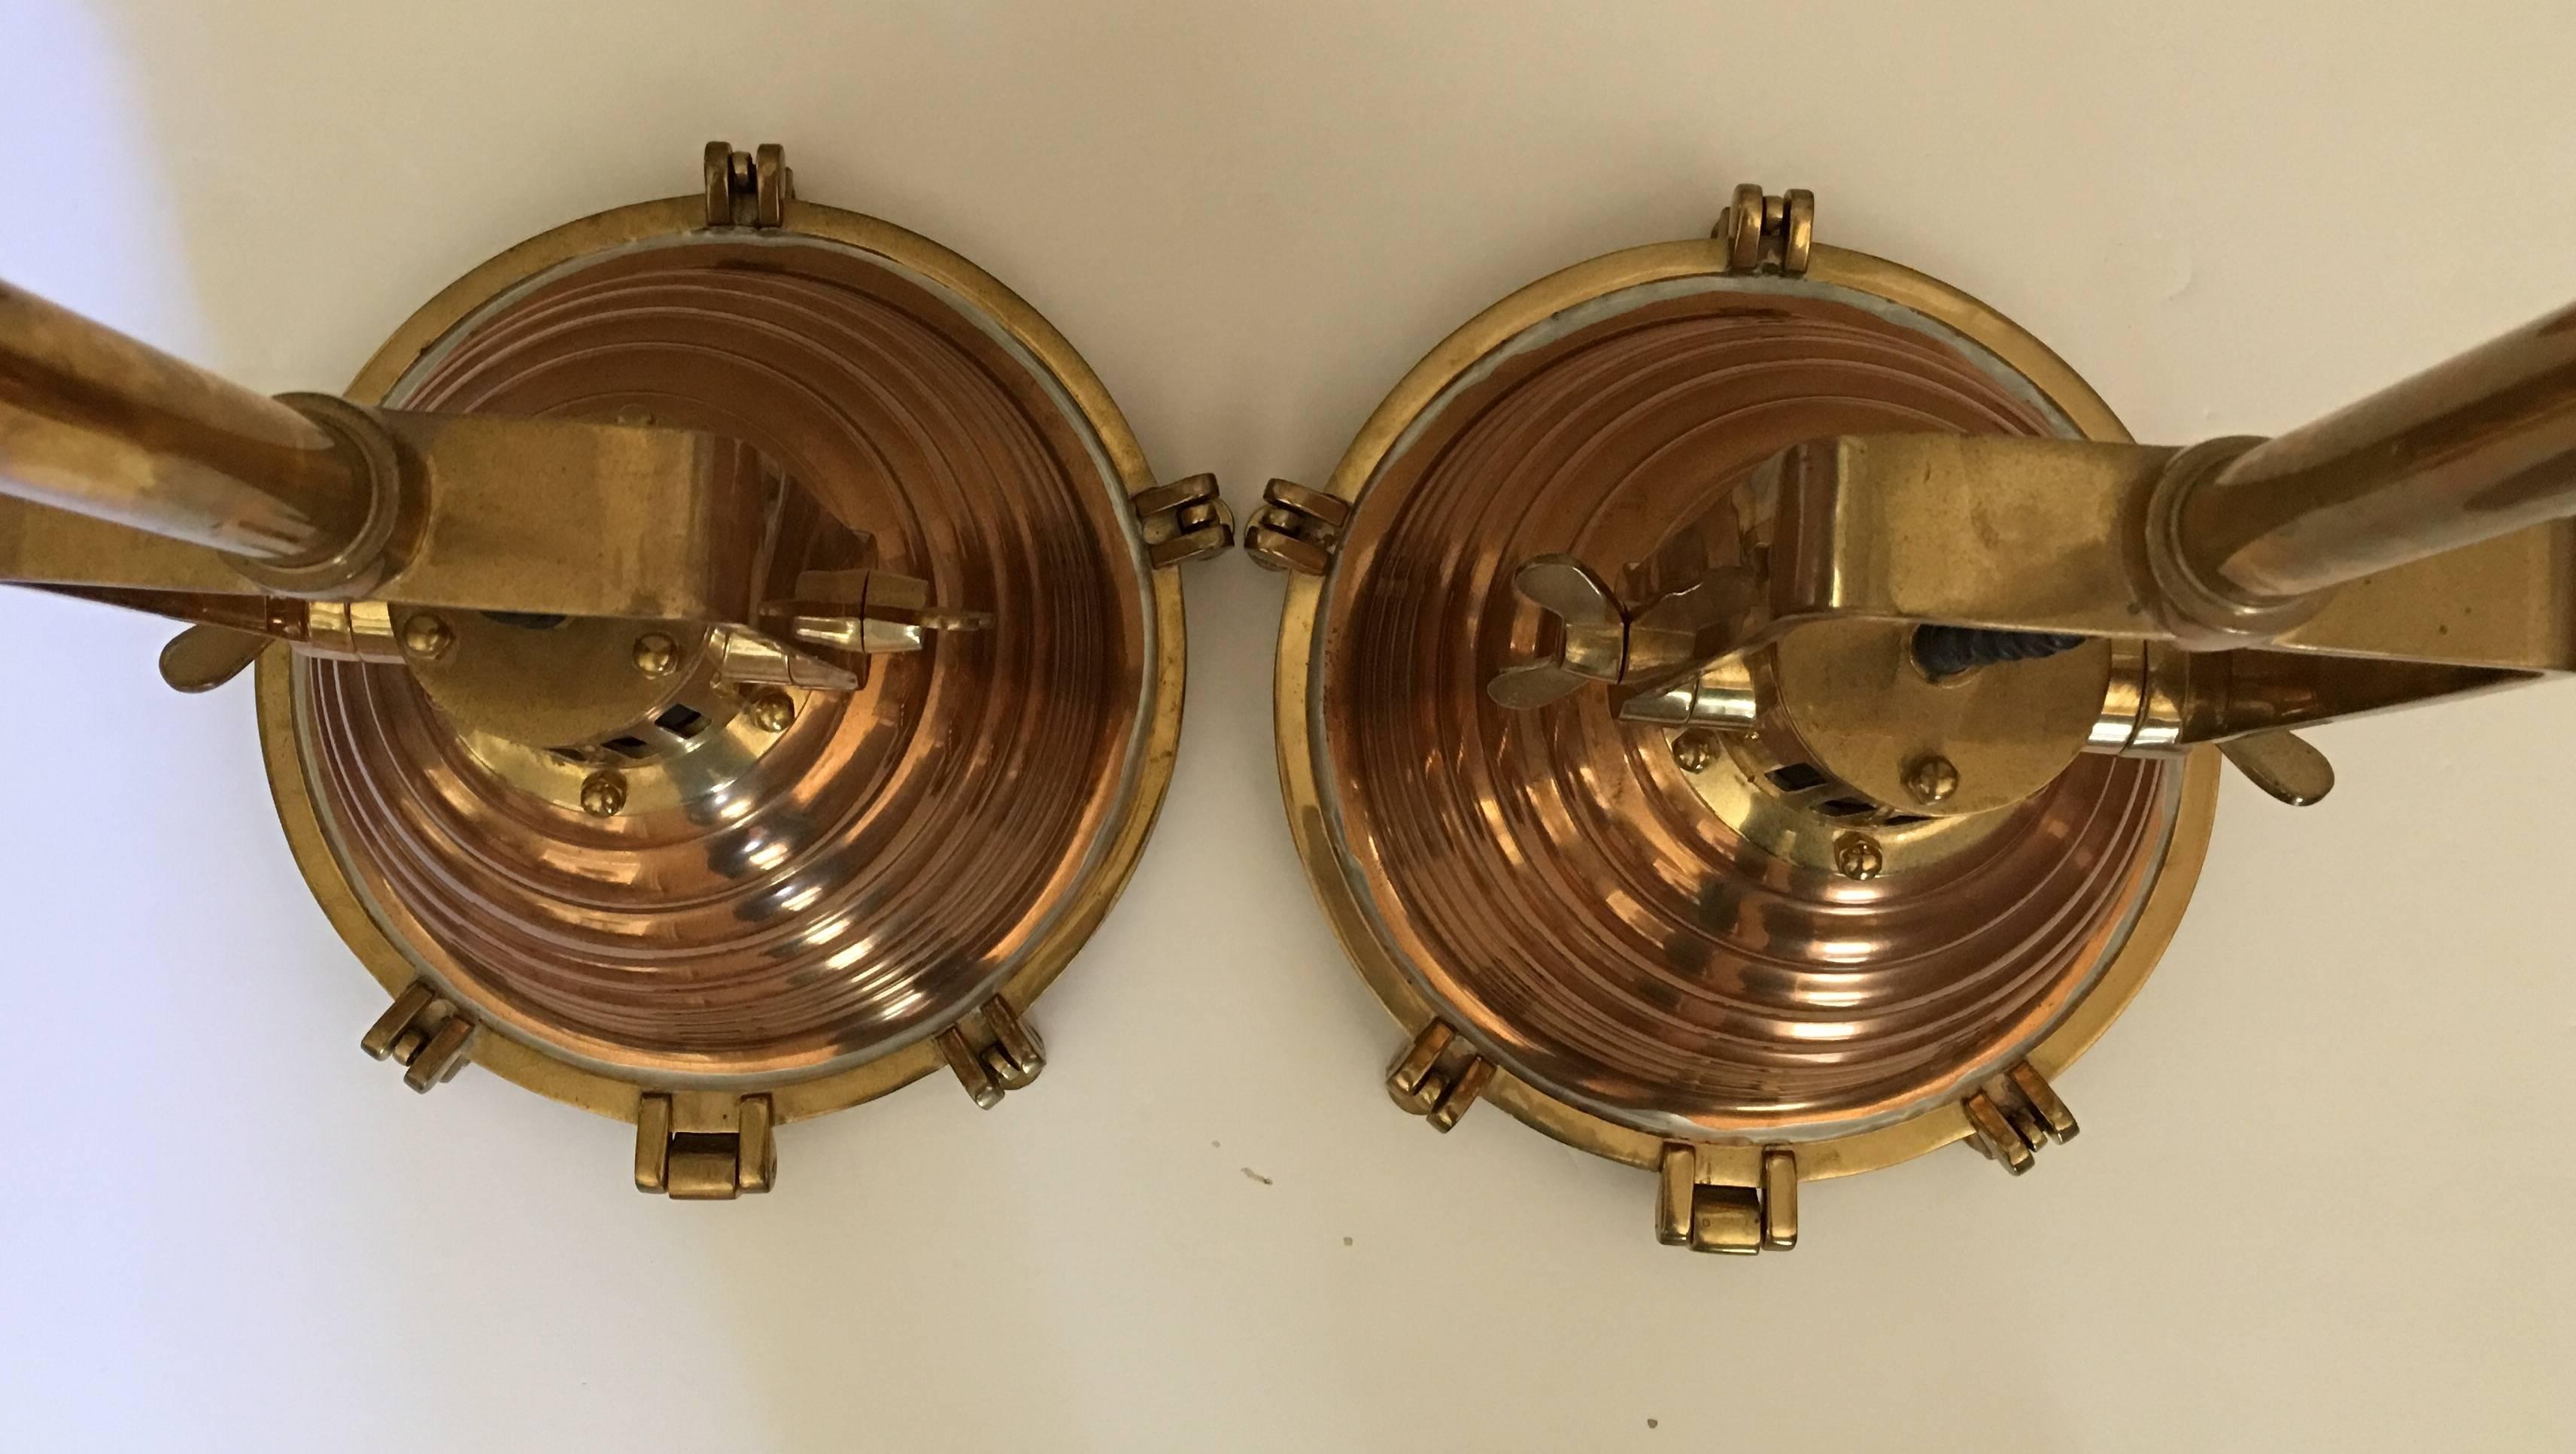 Pair of large polished copper and brass pendant lights by Luminaire.  Suspended from tubular brass rods, the adjustable heads feature white glass lenses which unscrew to access concealed bulb. Original wiring in working condition.